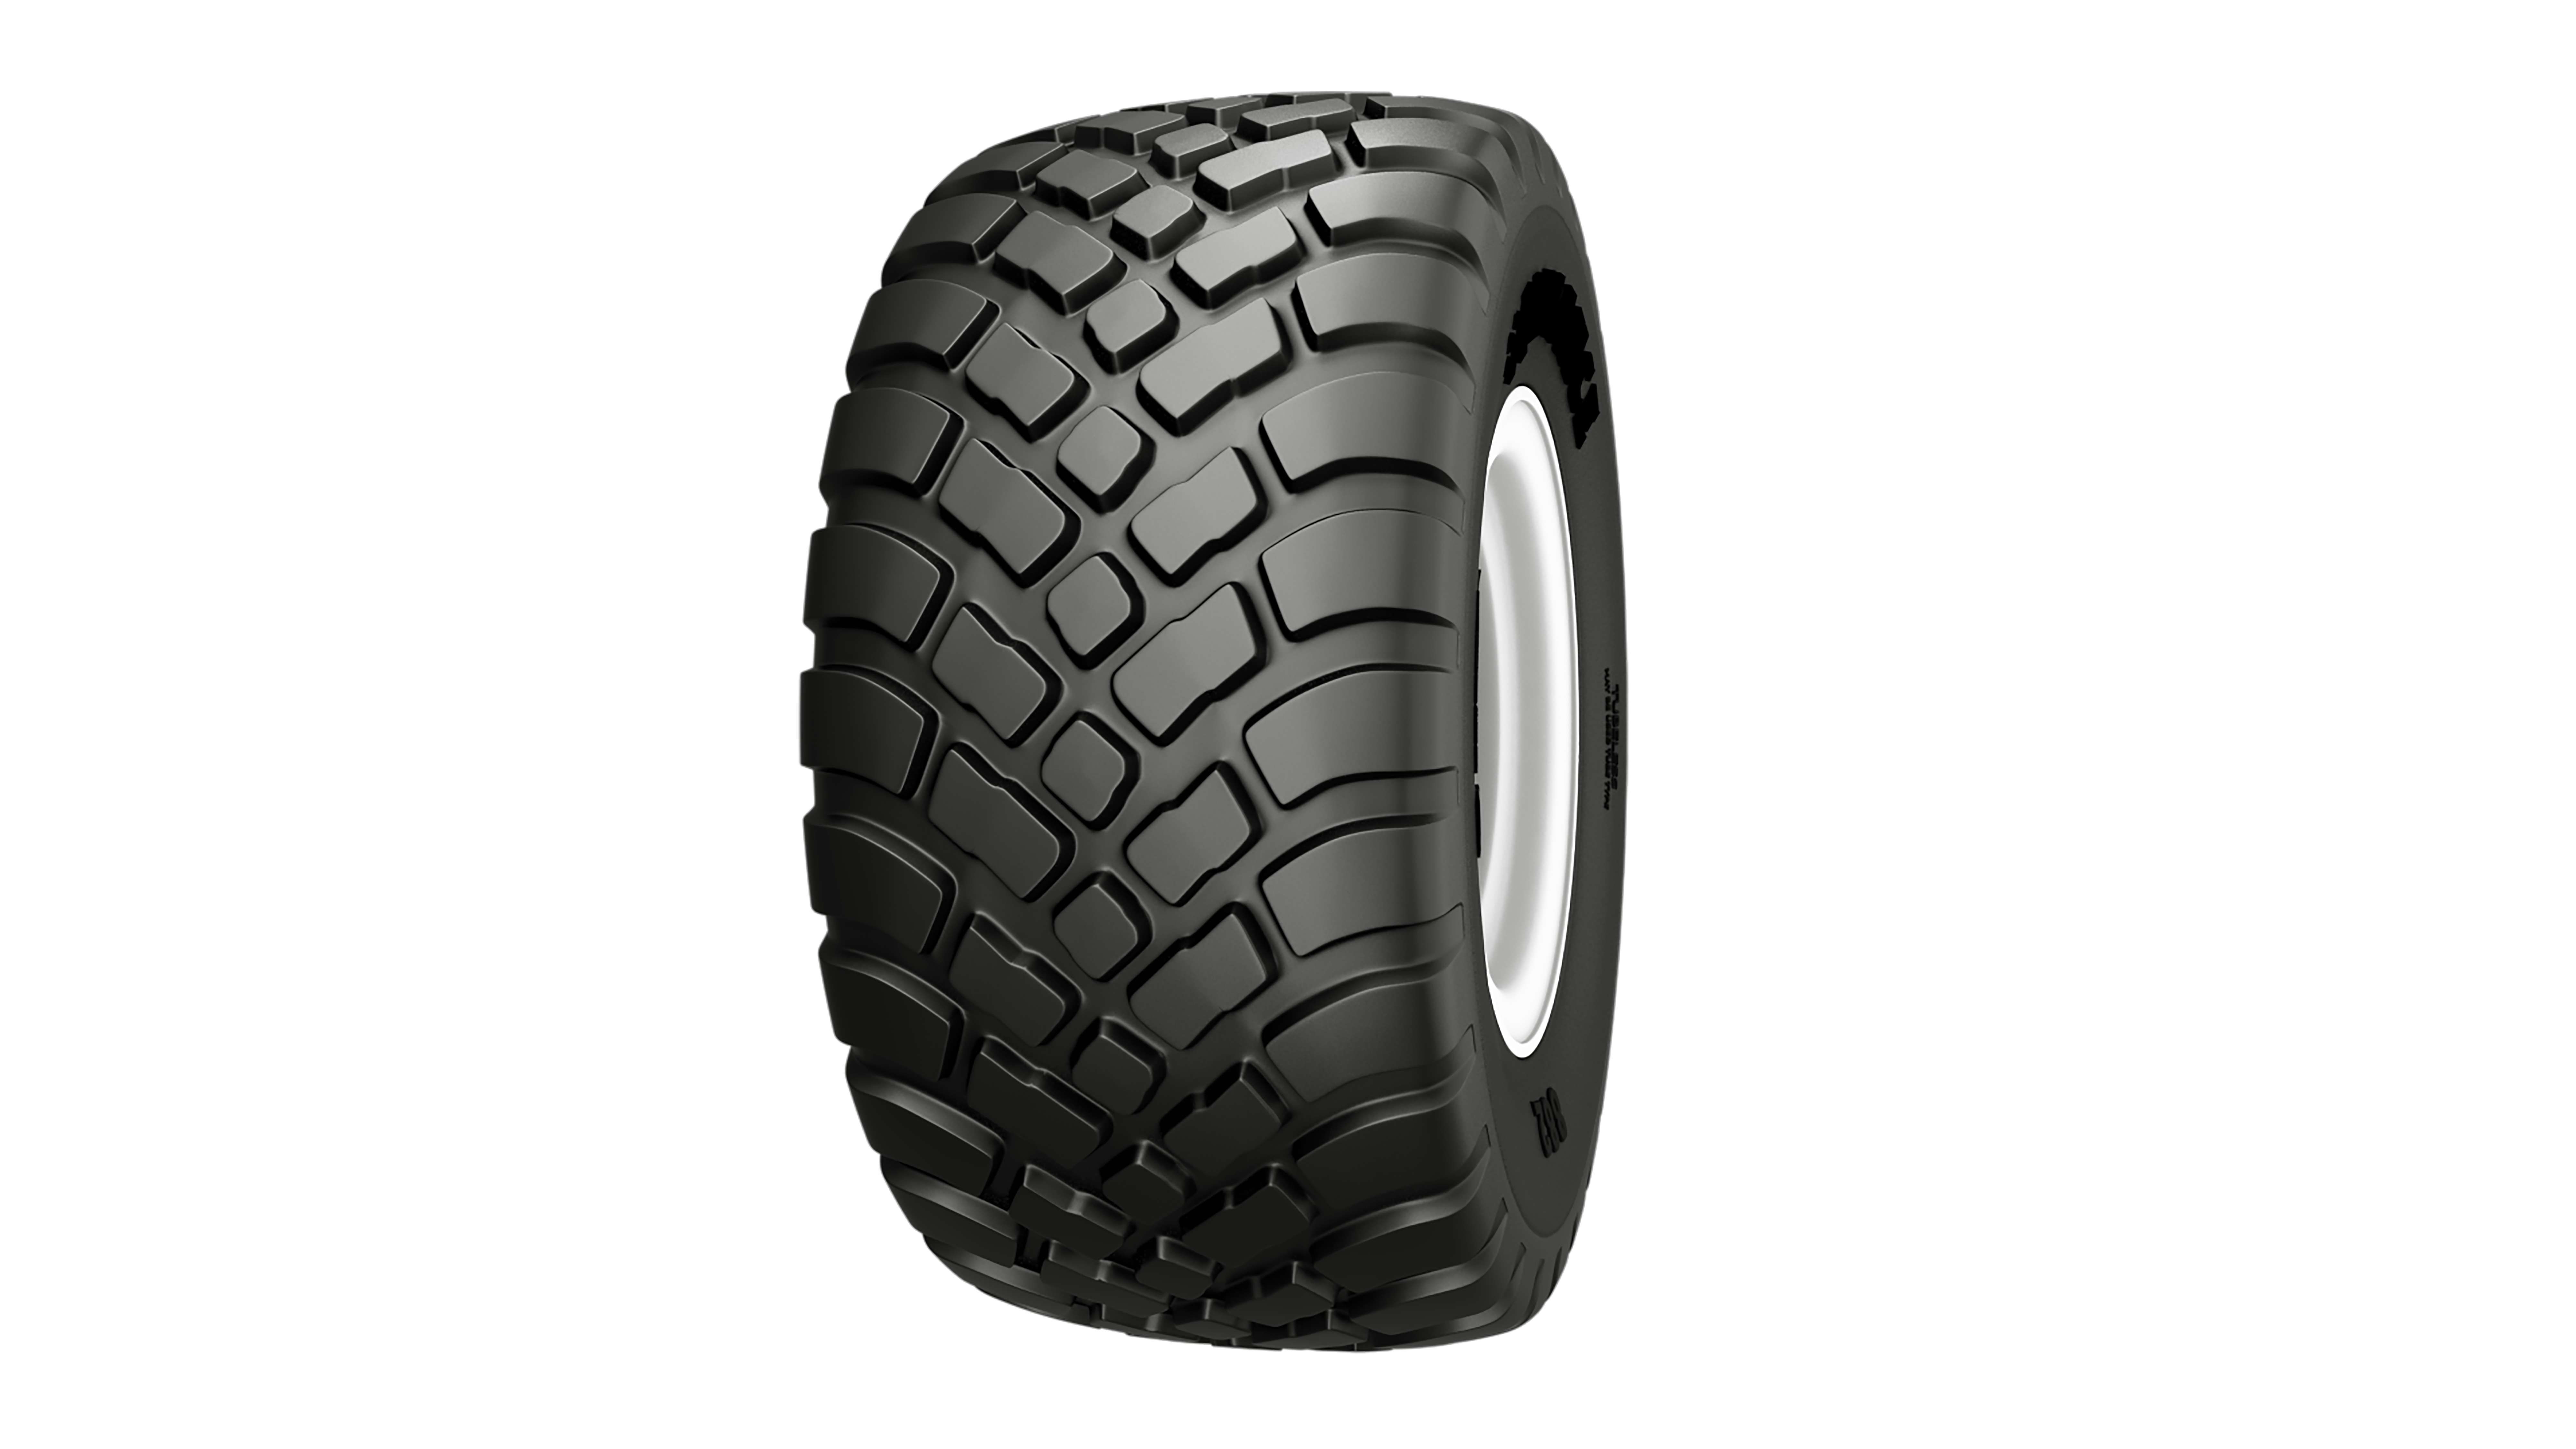 882 ALLIANCE AGRICULTURE Tire